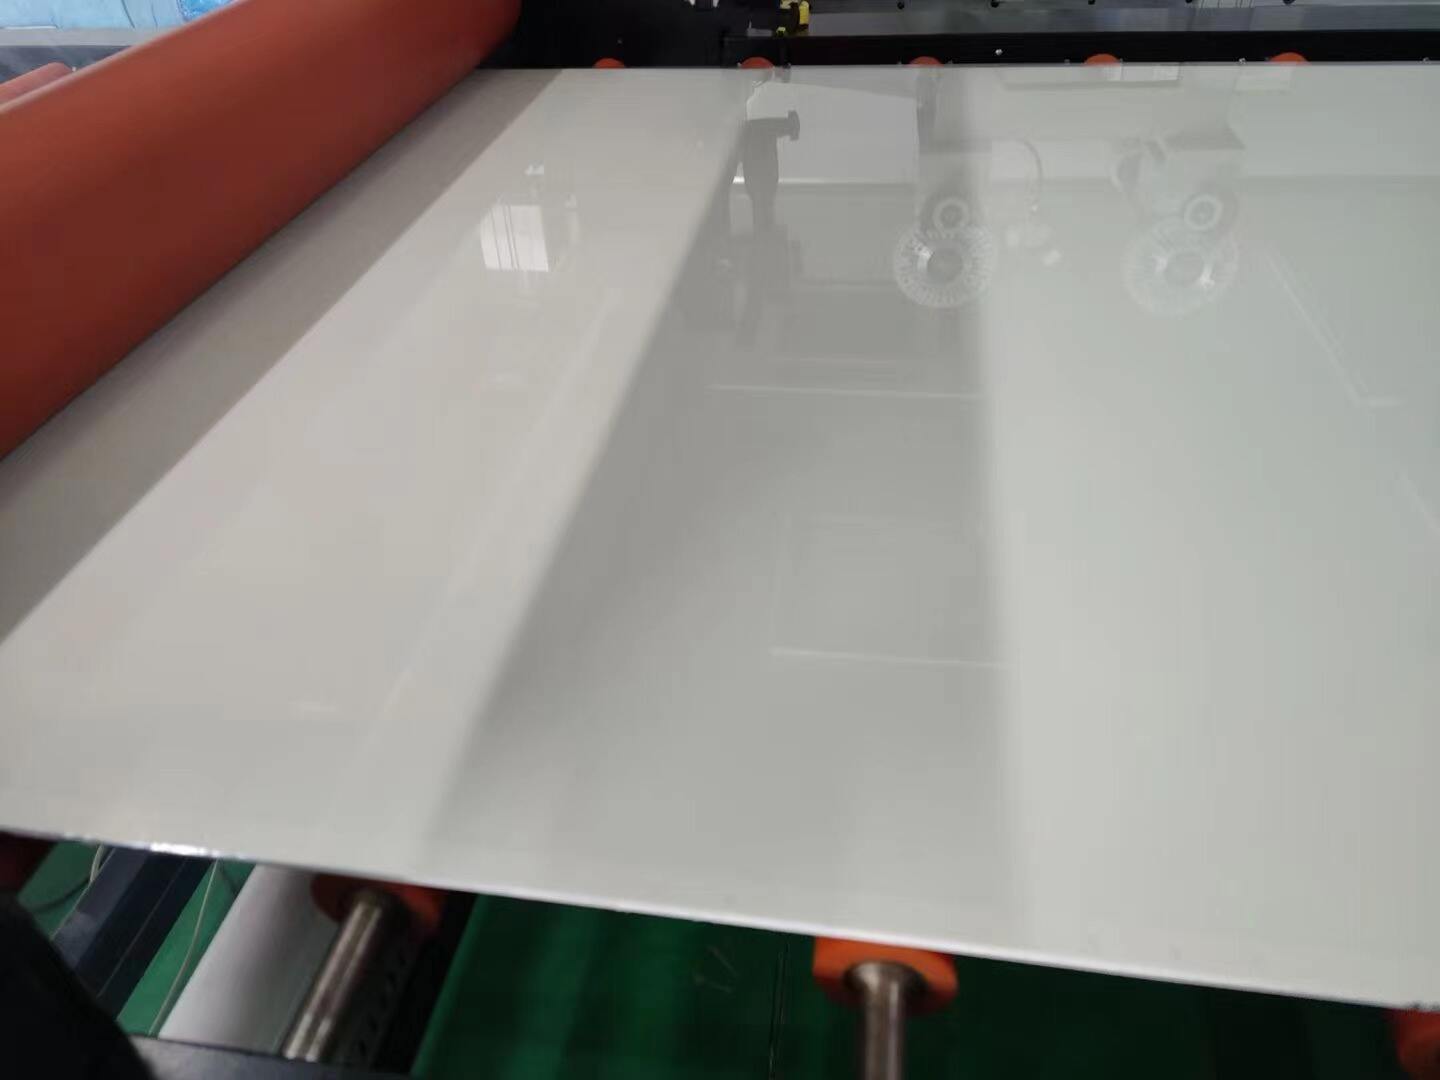 Andisco High Quality 2mm Cast Clear ESD Anti-Static PMMA Acrylic Plastic Sheets Hardcoated Surface Panel Cutting Moulding details